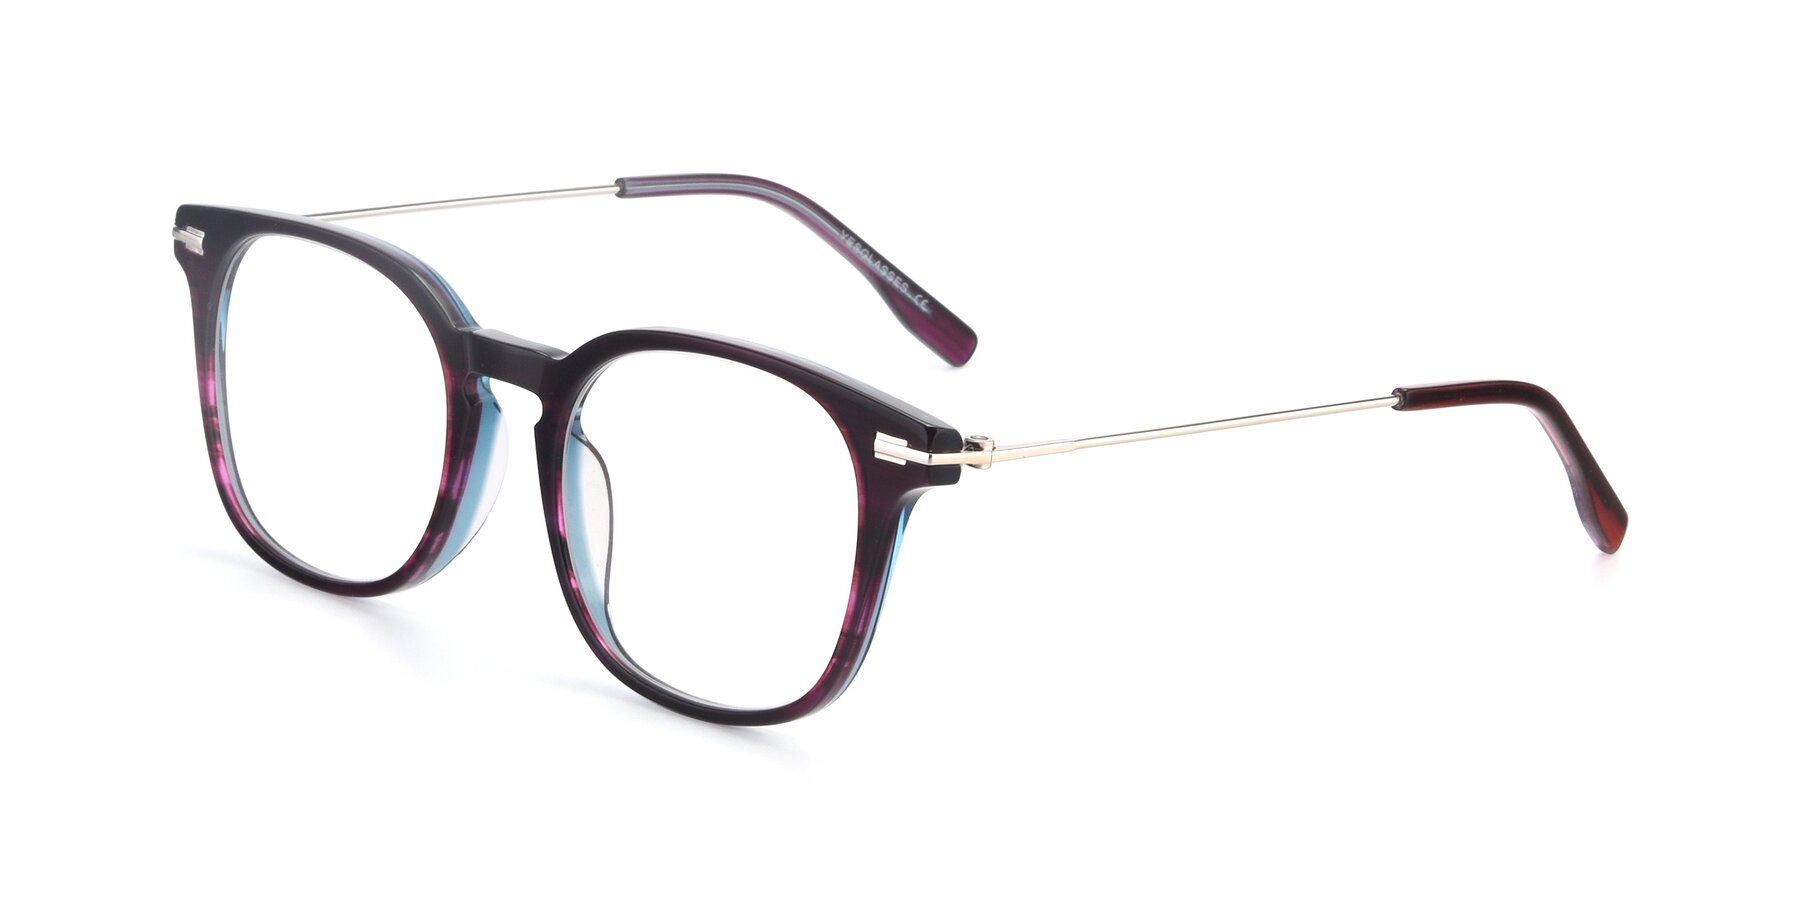 Angle of 17711 in Dark Purple with Clear Eyeglass Lenses